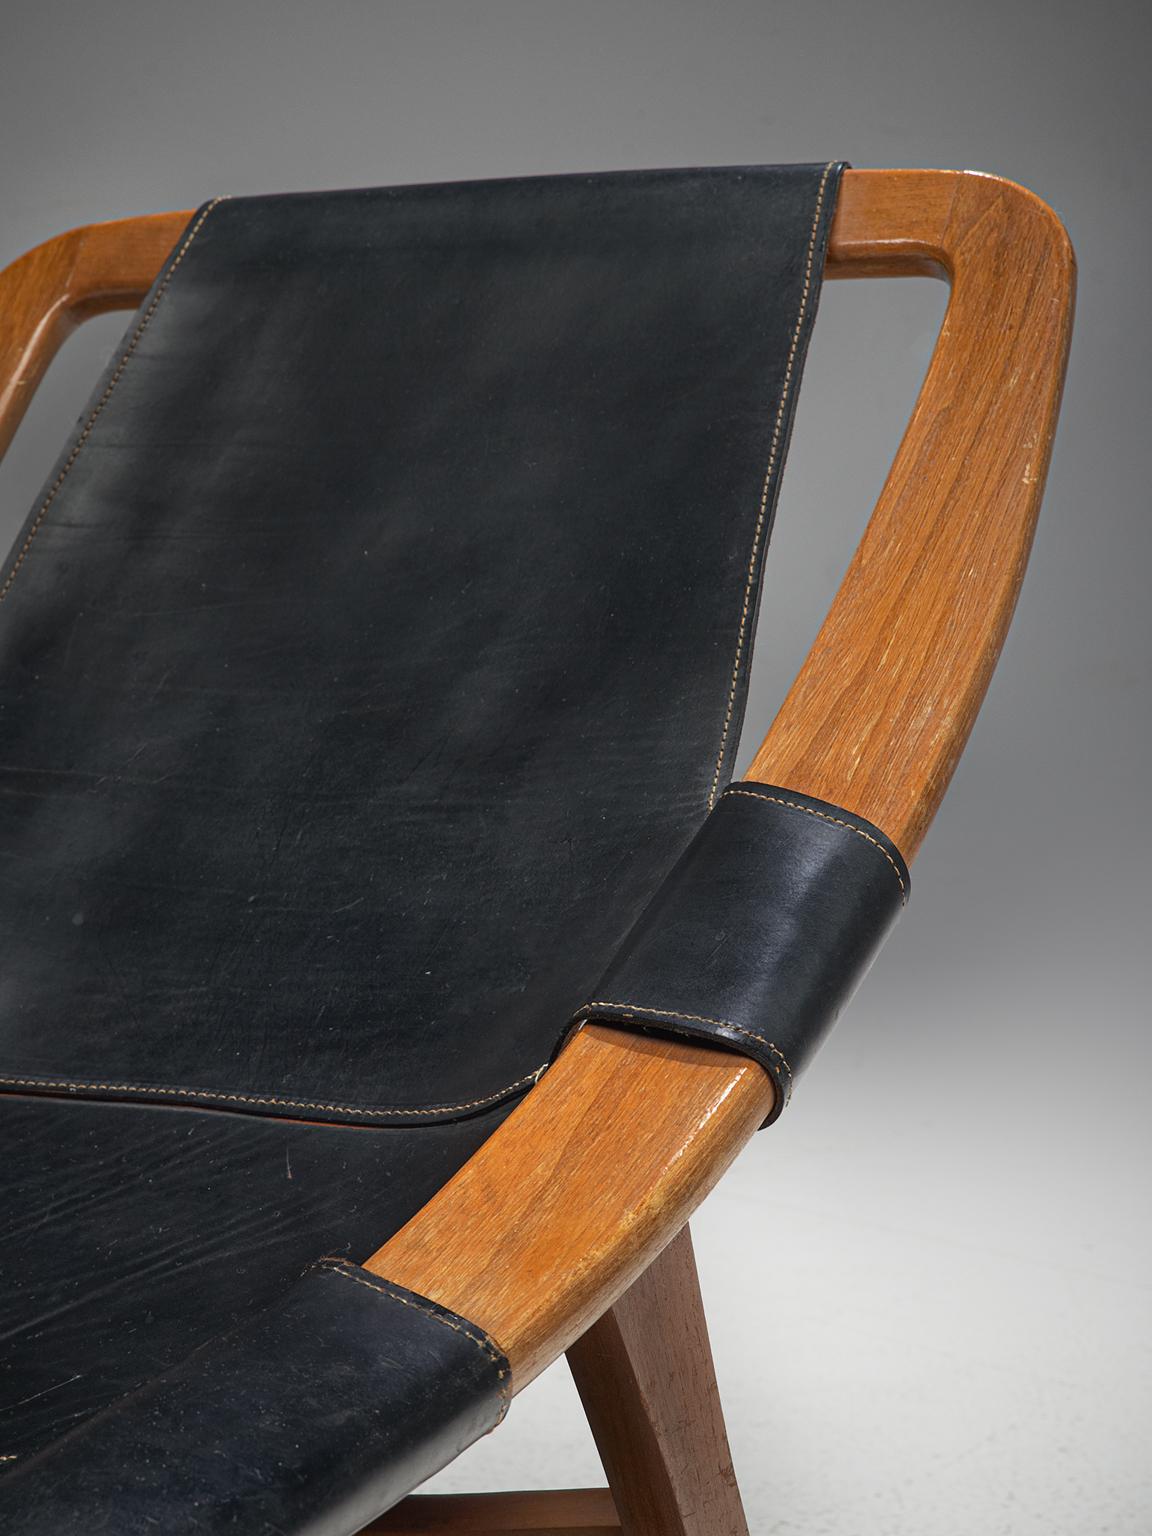 Arne Tidemand Ruud for Norcraft 'Holmkollen' Lounge Chair in Black Leather 2